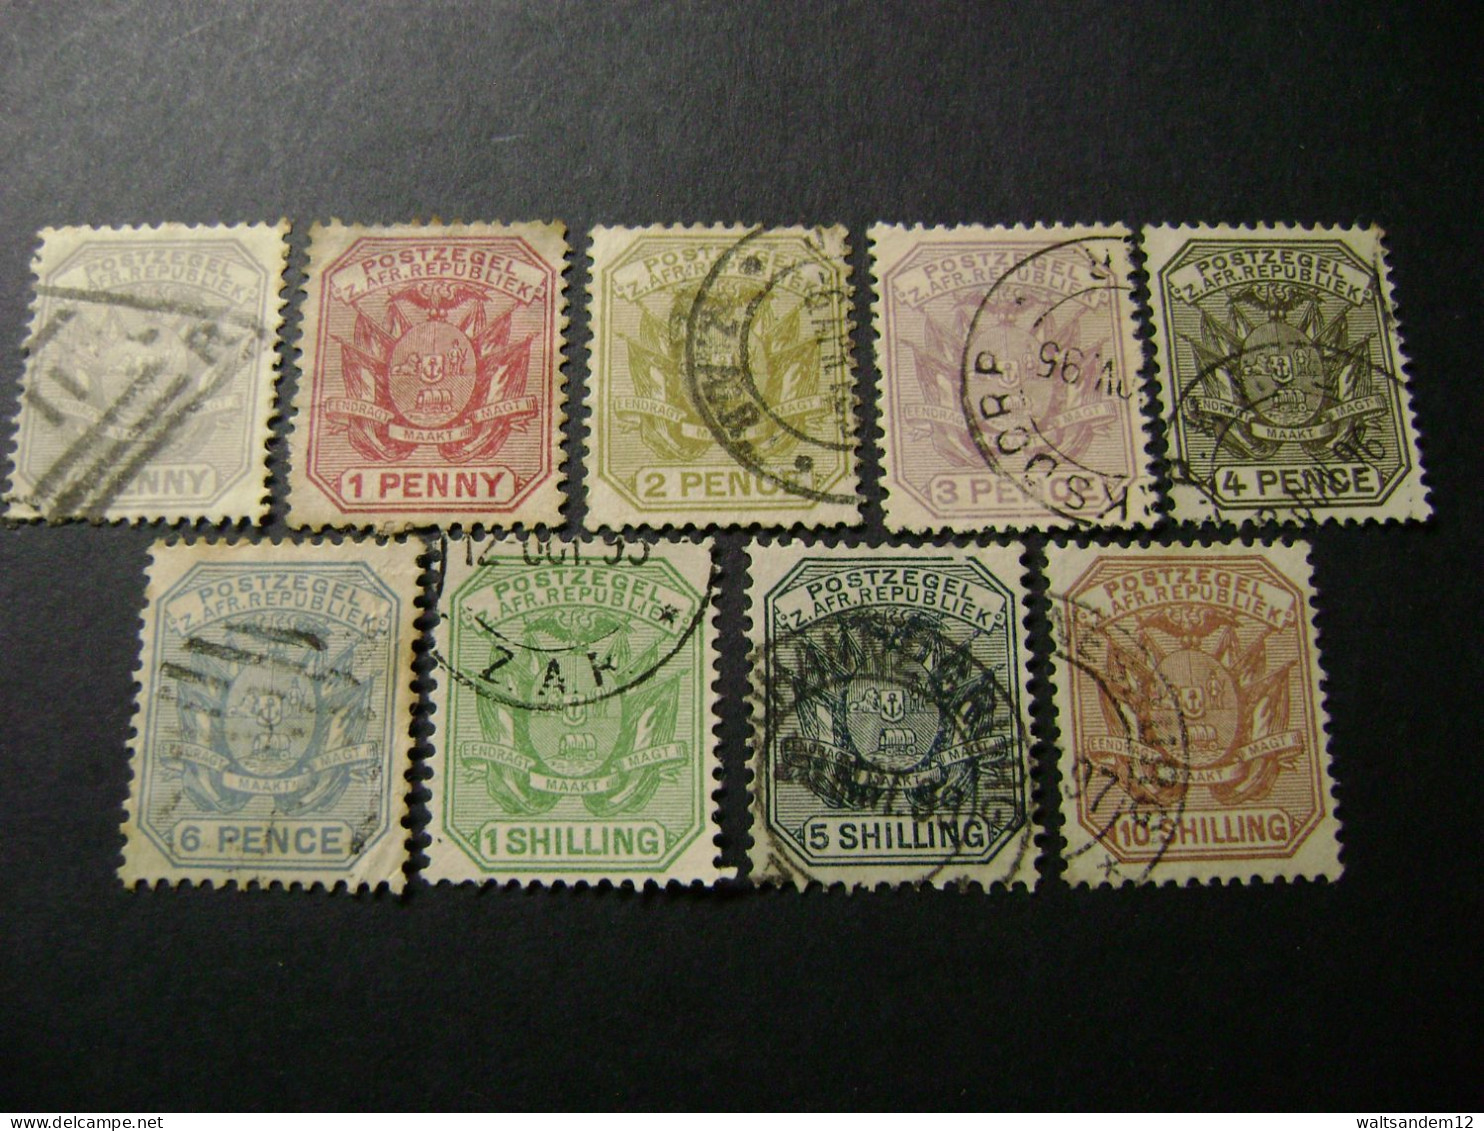 Transvaal (ZAR) 1895-96 Definitive Set Of 9 Wagon With Pole (SG 205-212a) - Used - Transvaal (1870-1909)